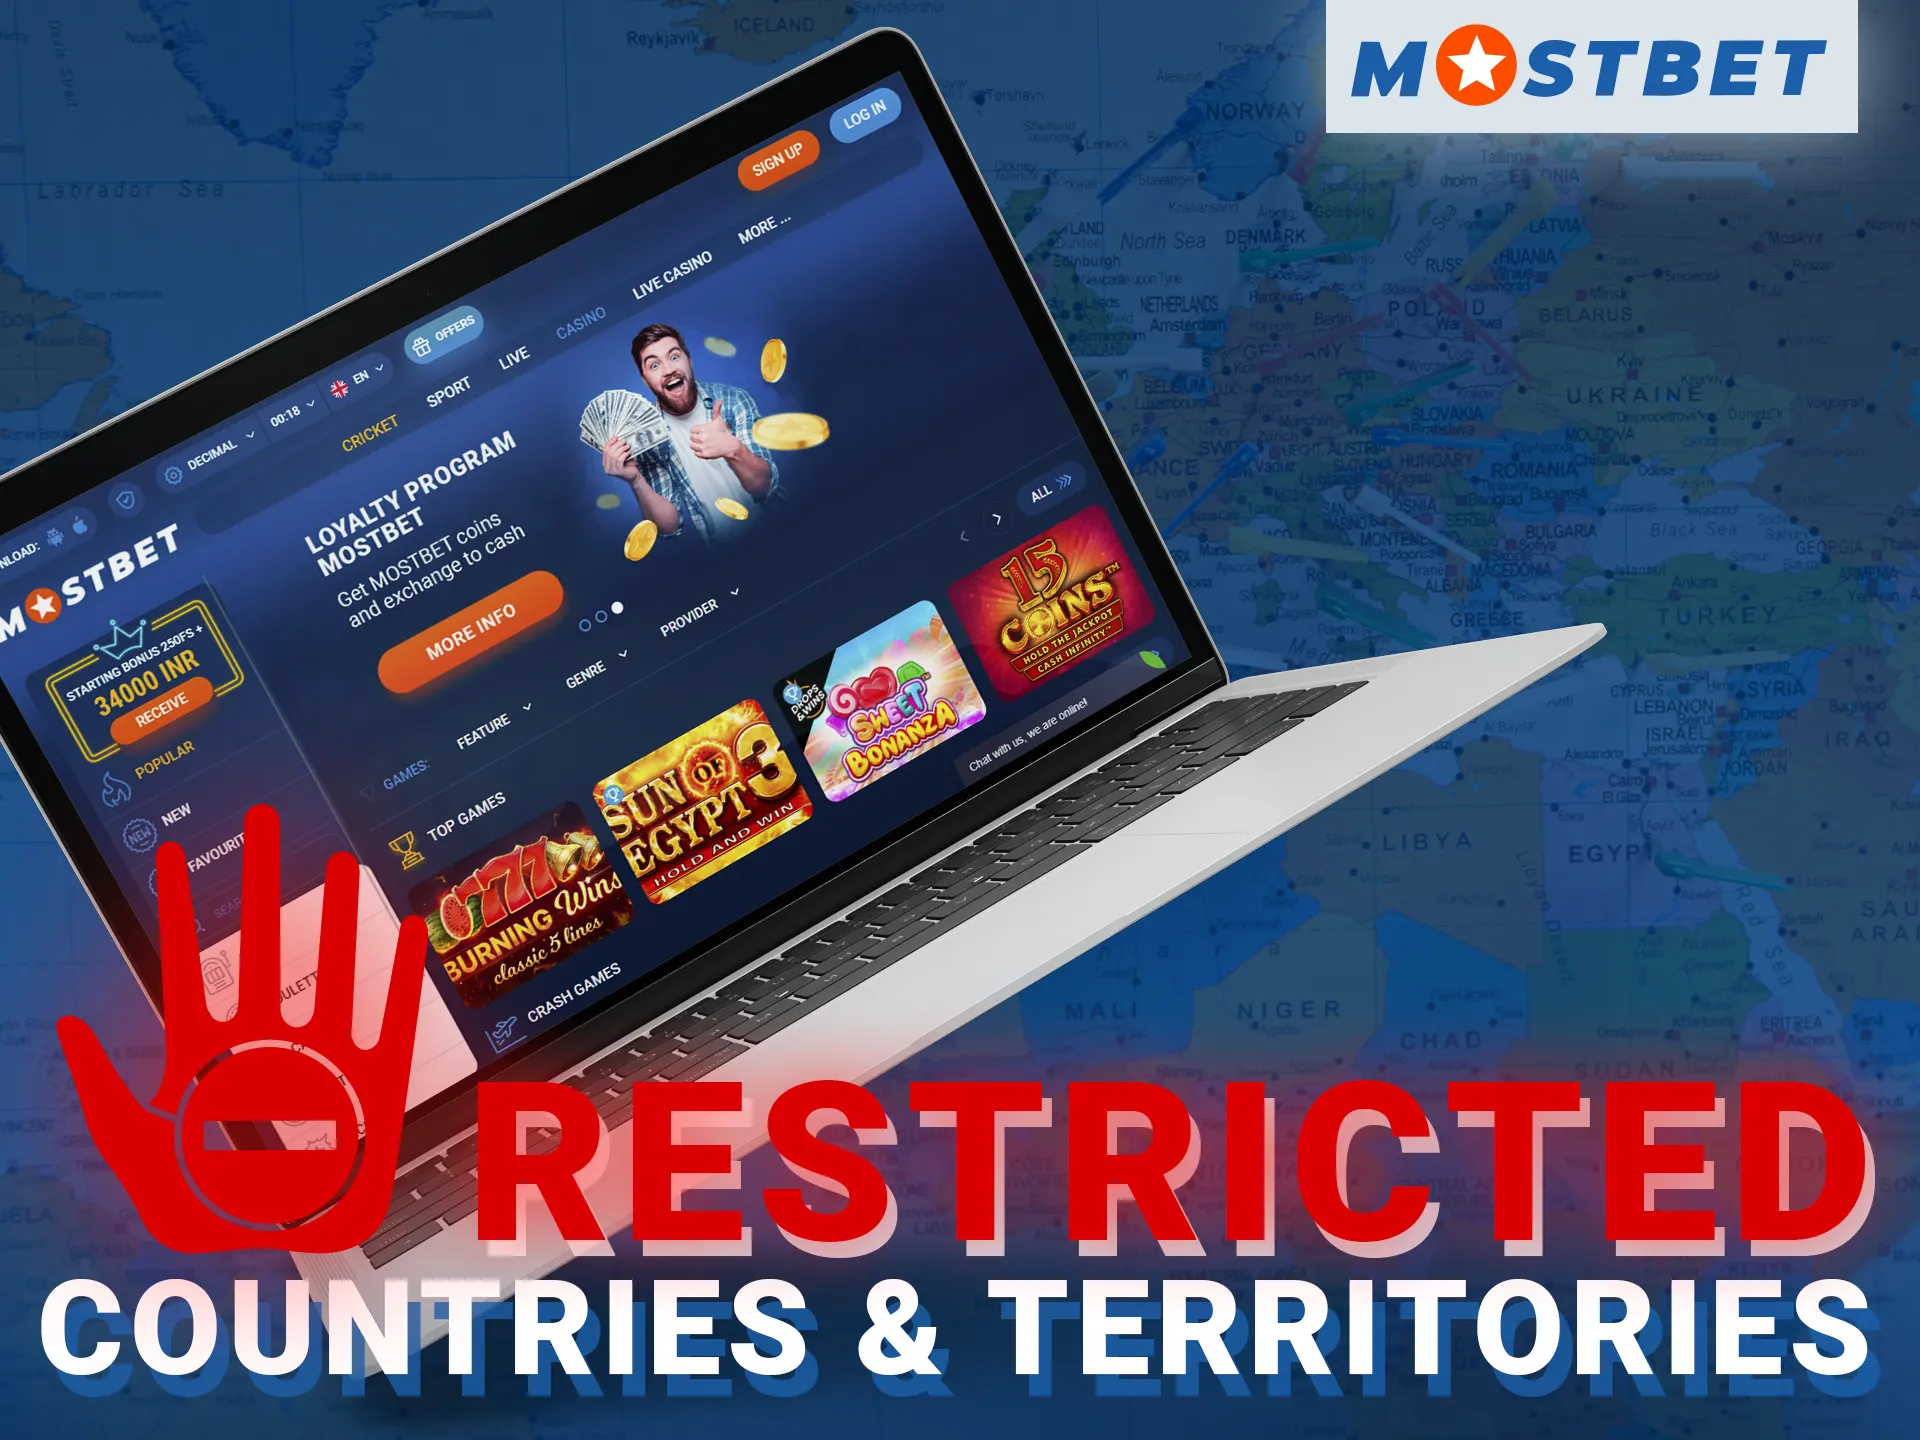 Several countries have imposed restrictions on accessing the Mostbet casino site.